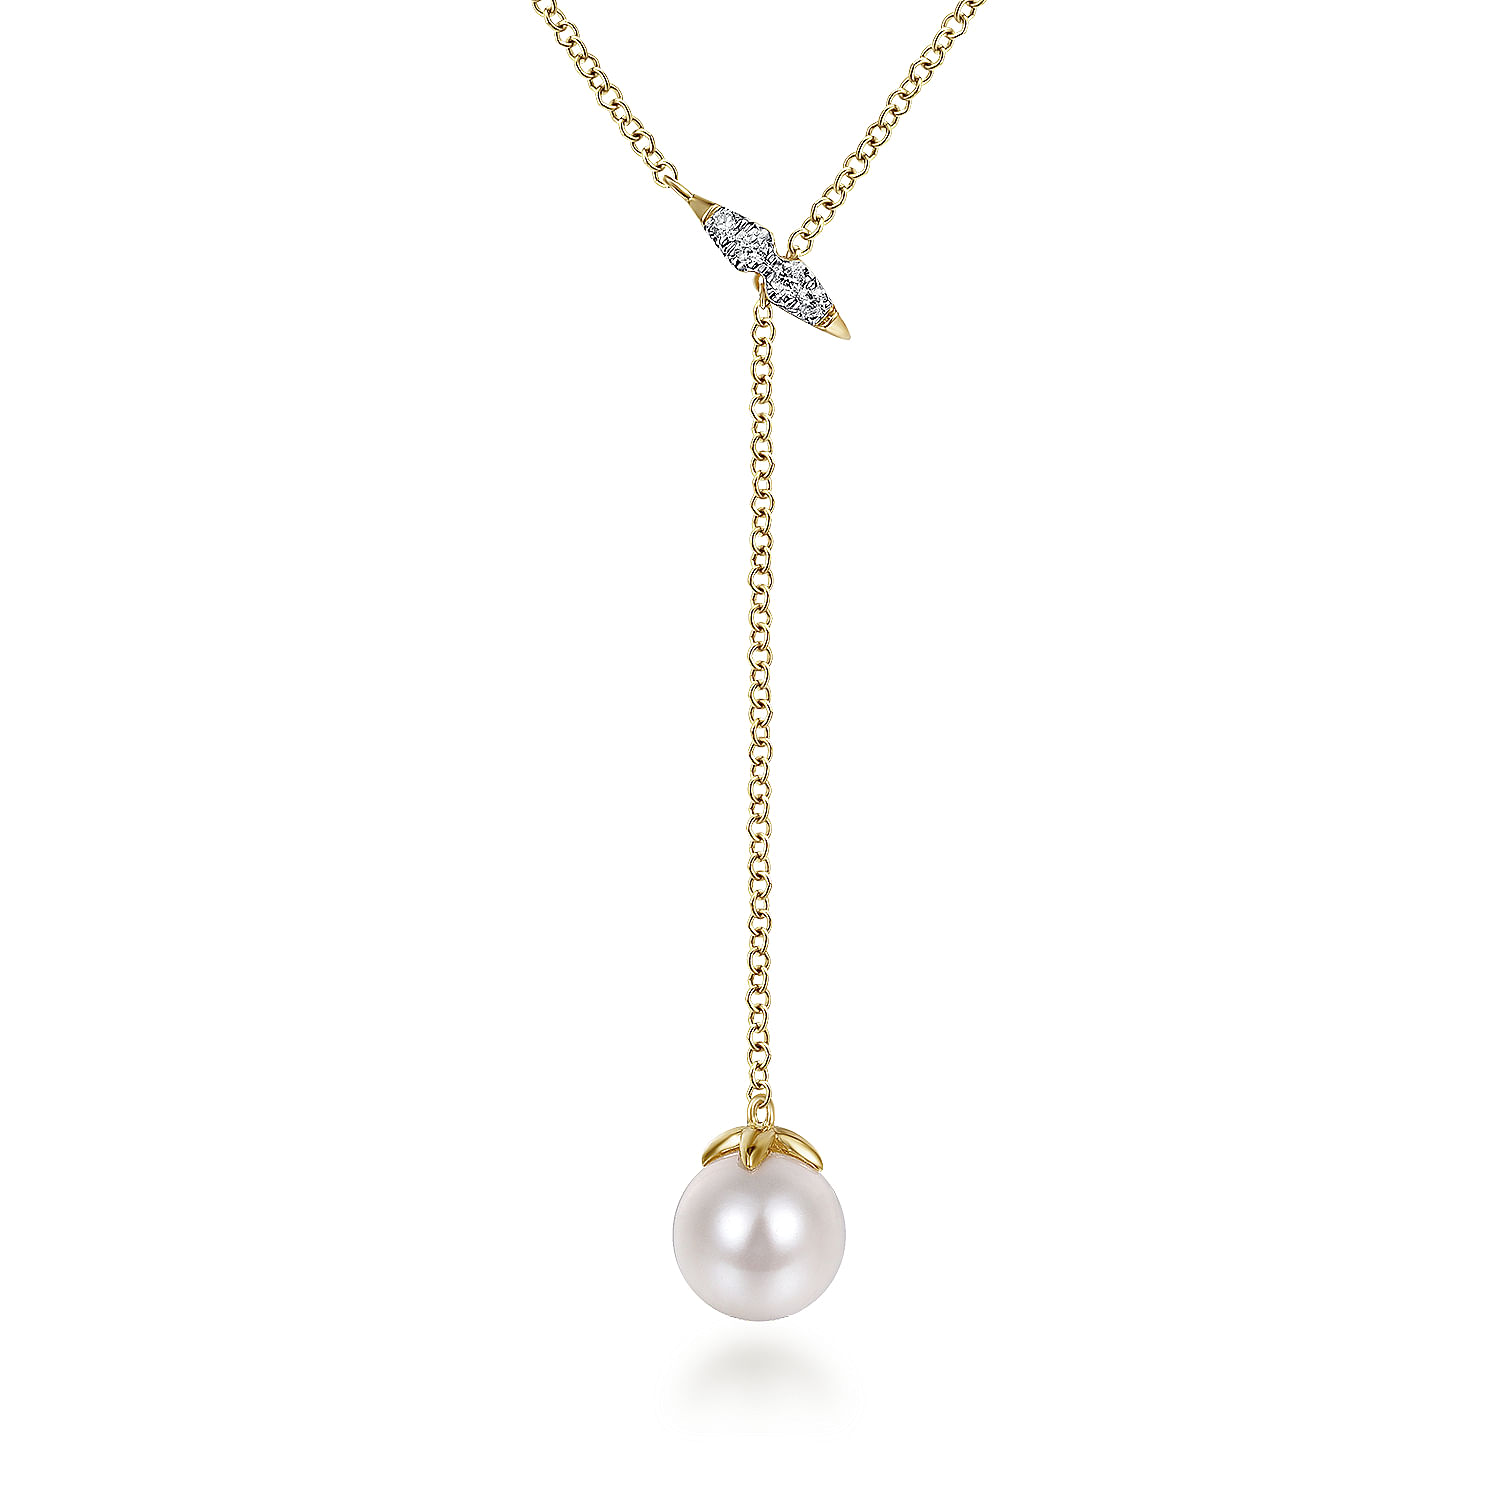 14K Yellow Gold Diamond Bar Y Necklace with Cultured Pearl Drop